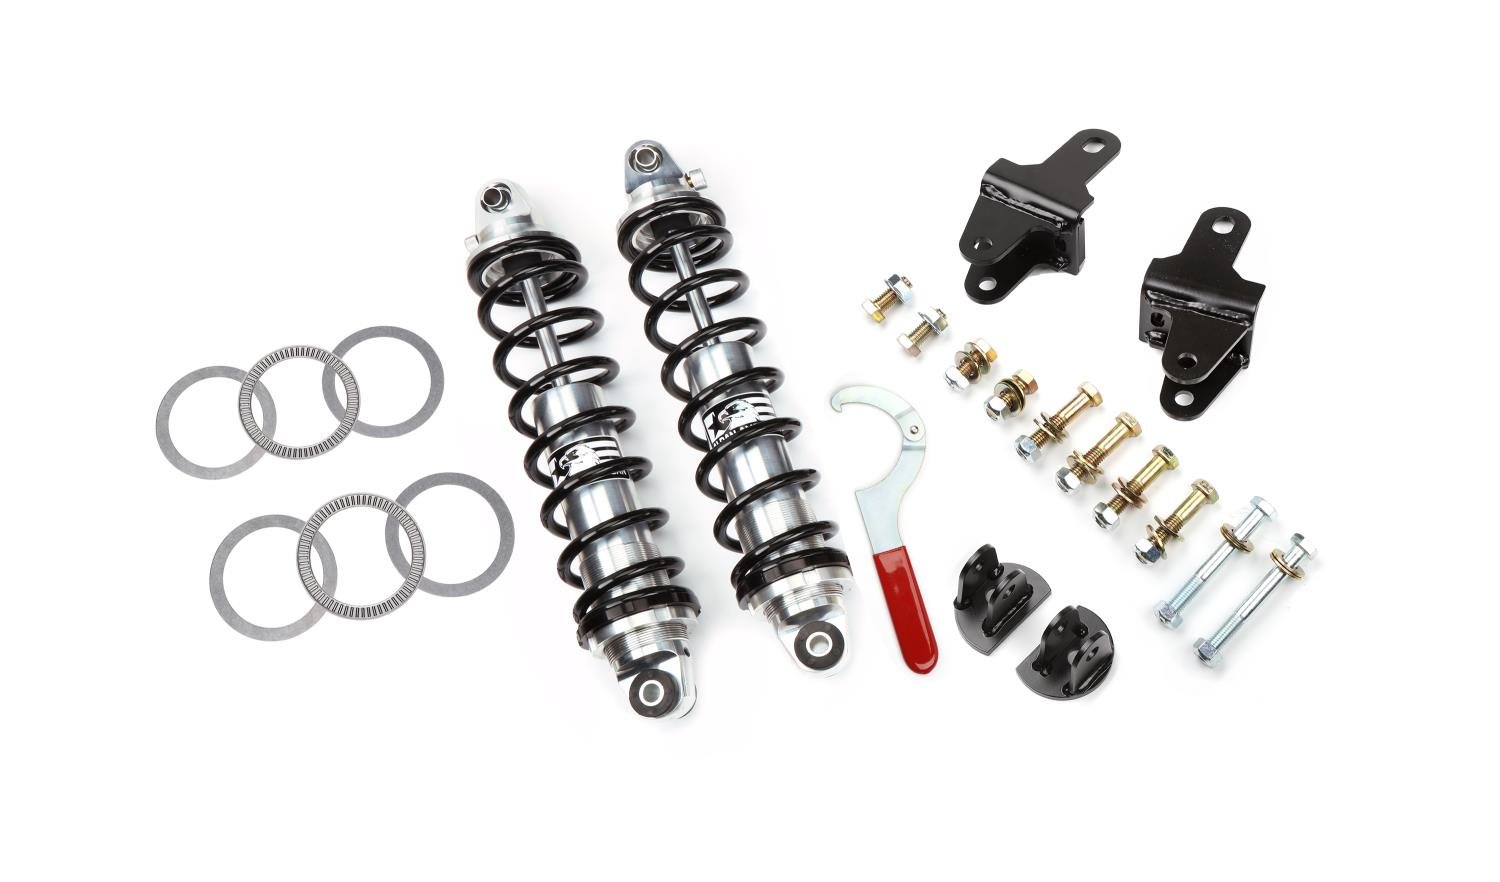 Road Comp Series Rear Coilover Conversion Kit 1979-2004 Ford Mustang, Single-Adjustable [180 lbs./in. Springs]